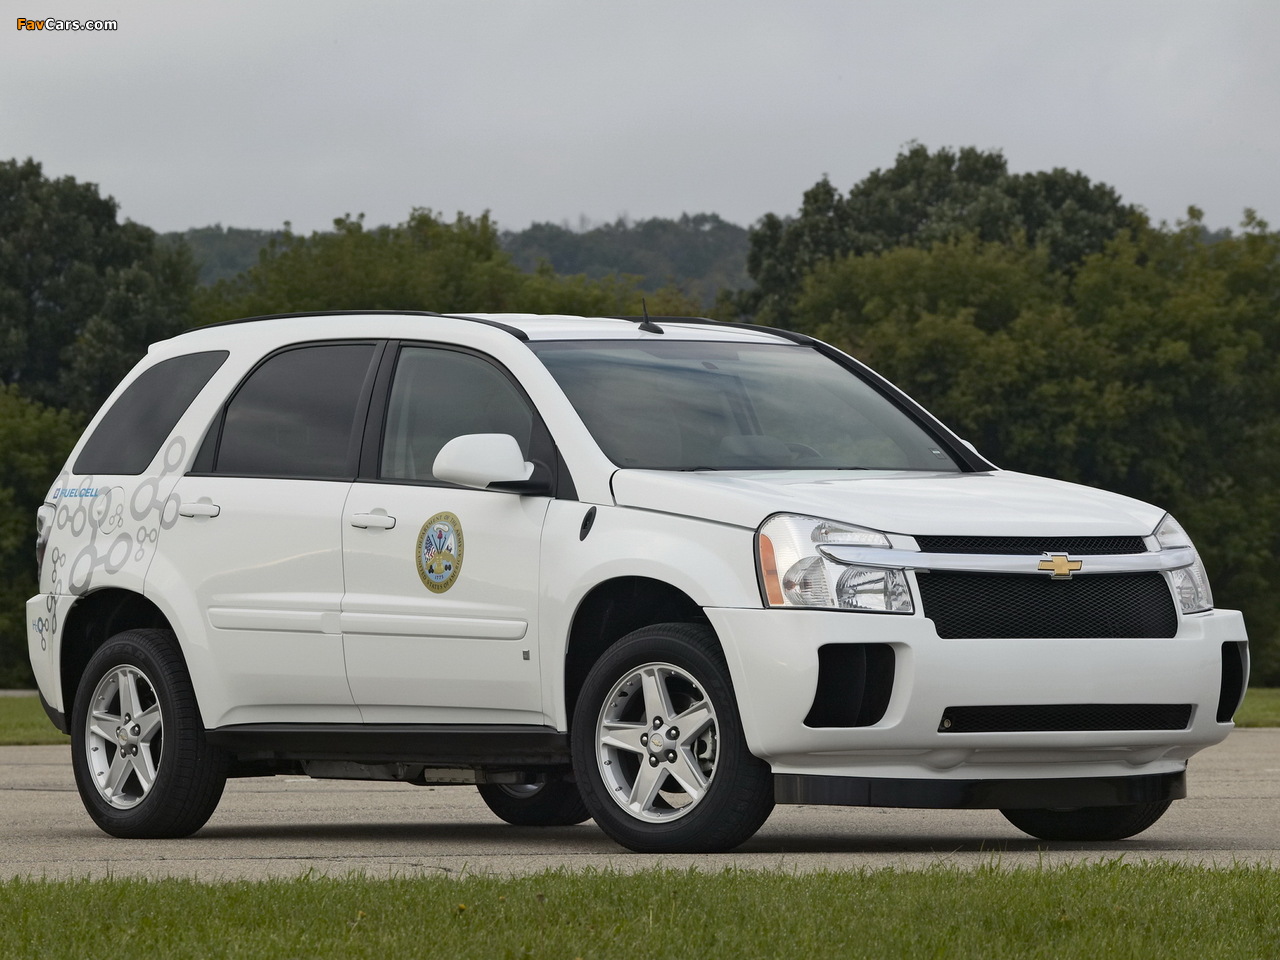 Chevrolet Equinox Fuel Cell U.S. Army Prototype 2006 images (1280 x 960)